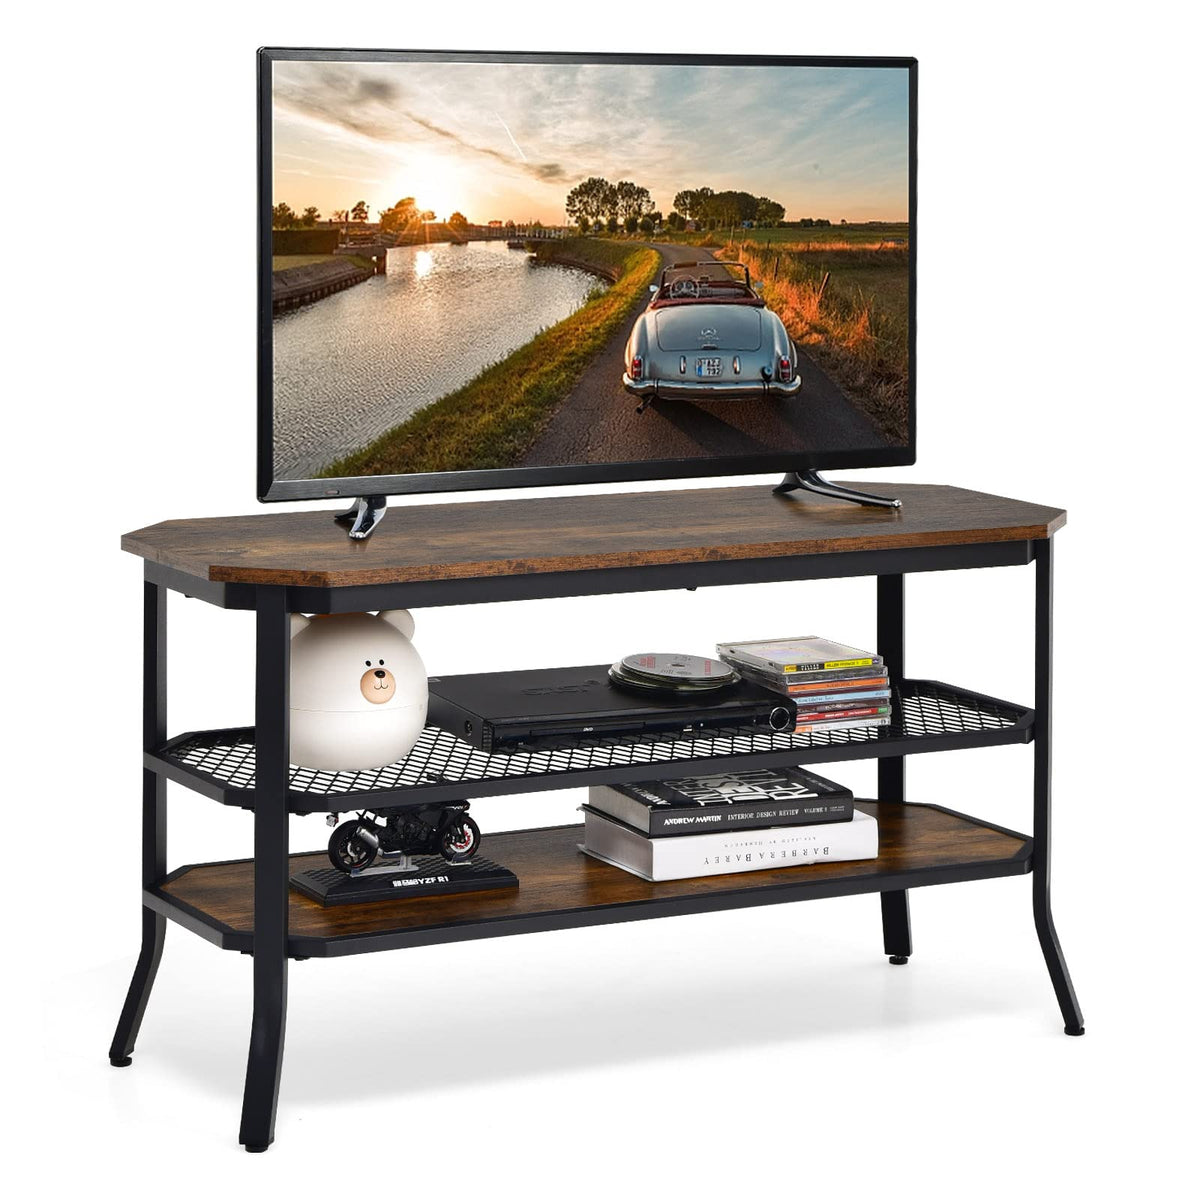 Giantex TV Stand for TVs up to 46”, 3-Tier Console Table w/Metal Frame & Storage Shelves